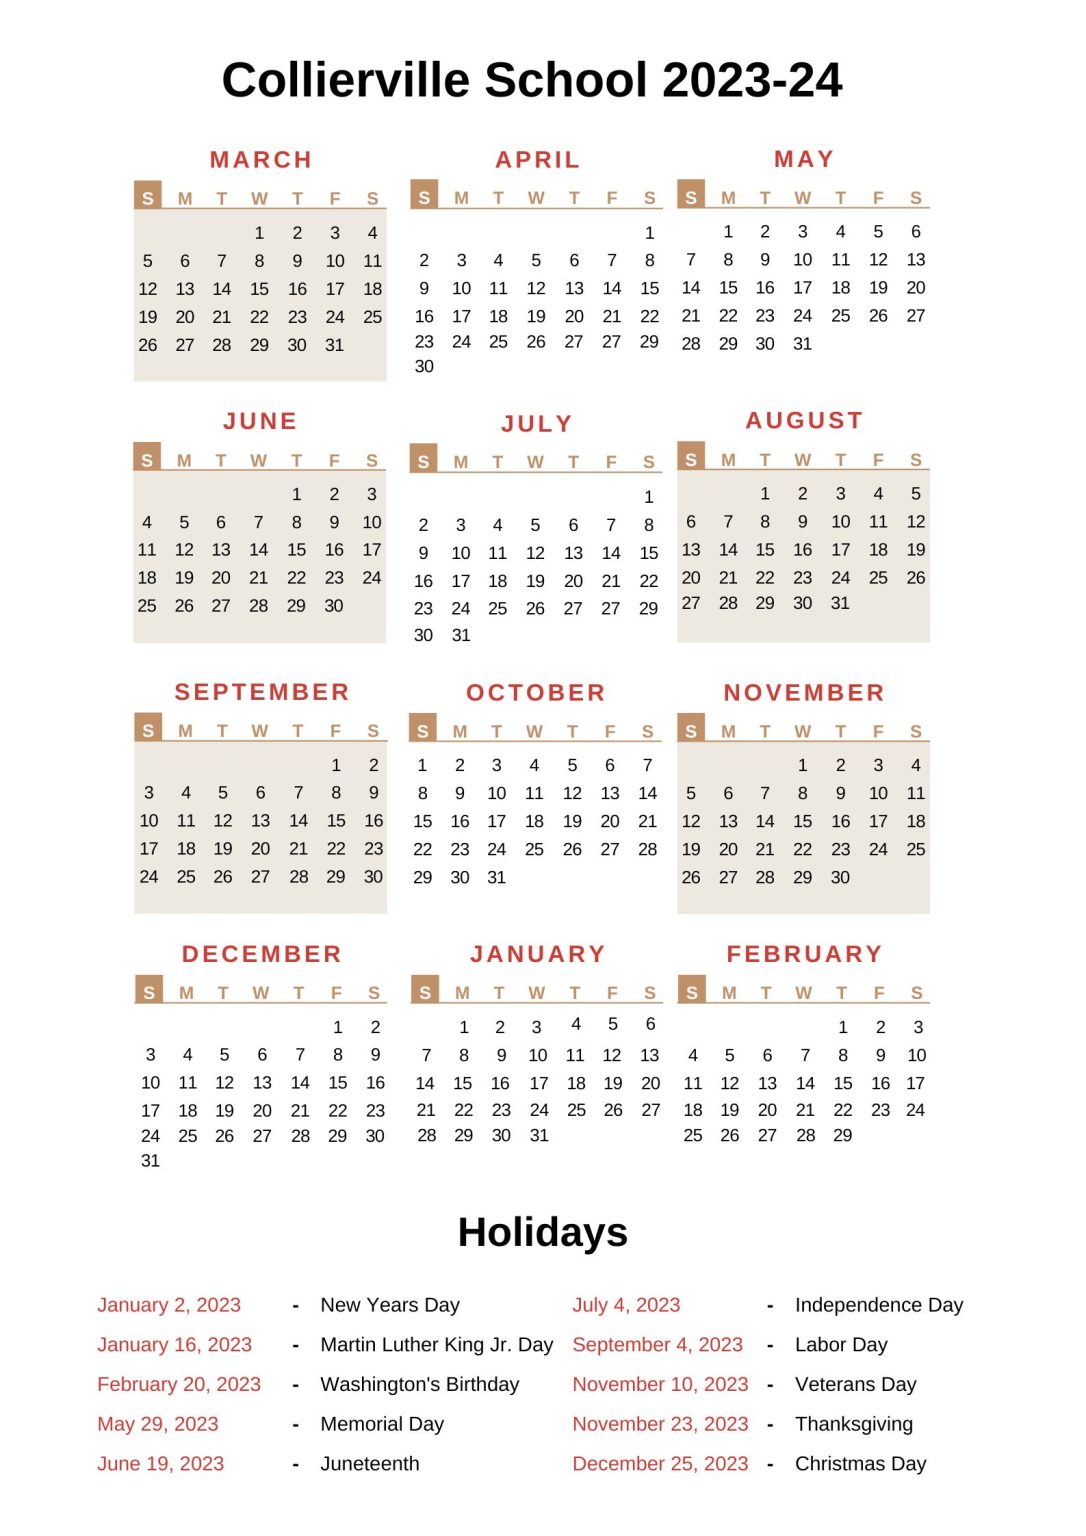 Collierville Schools Calendar 202324 With Holidays